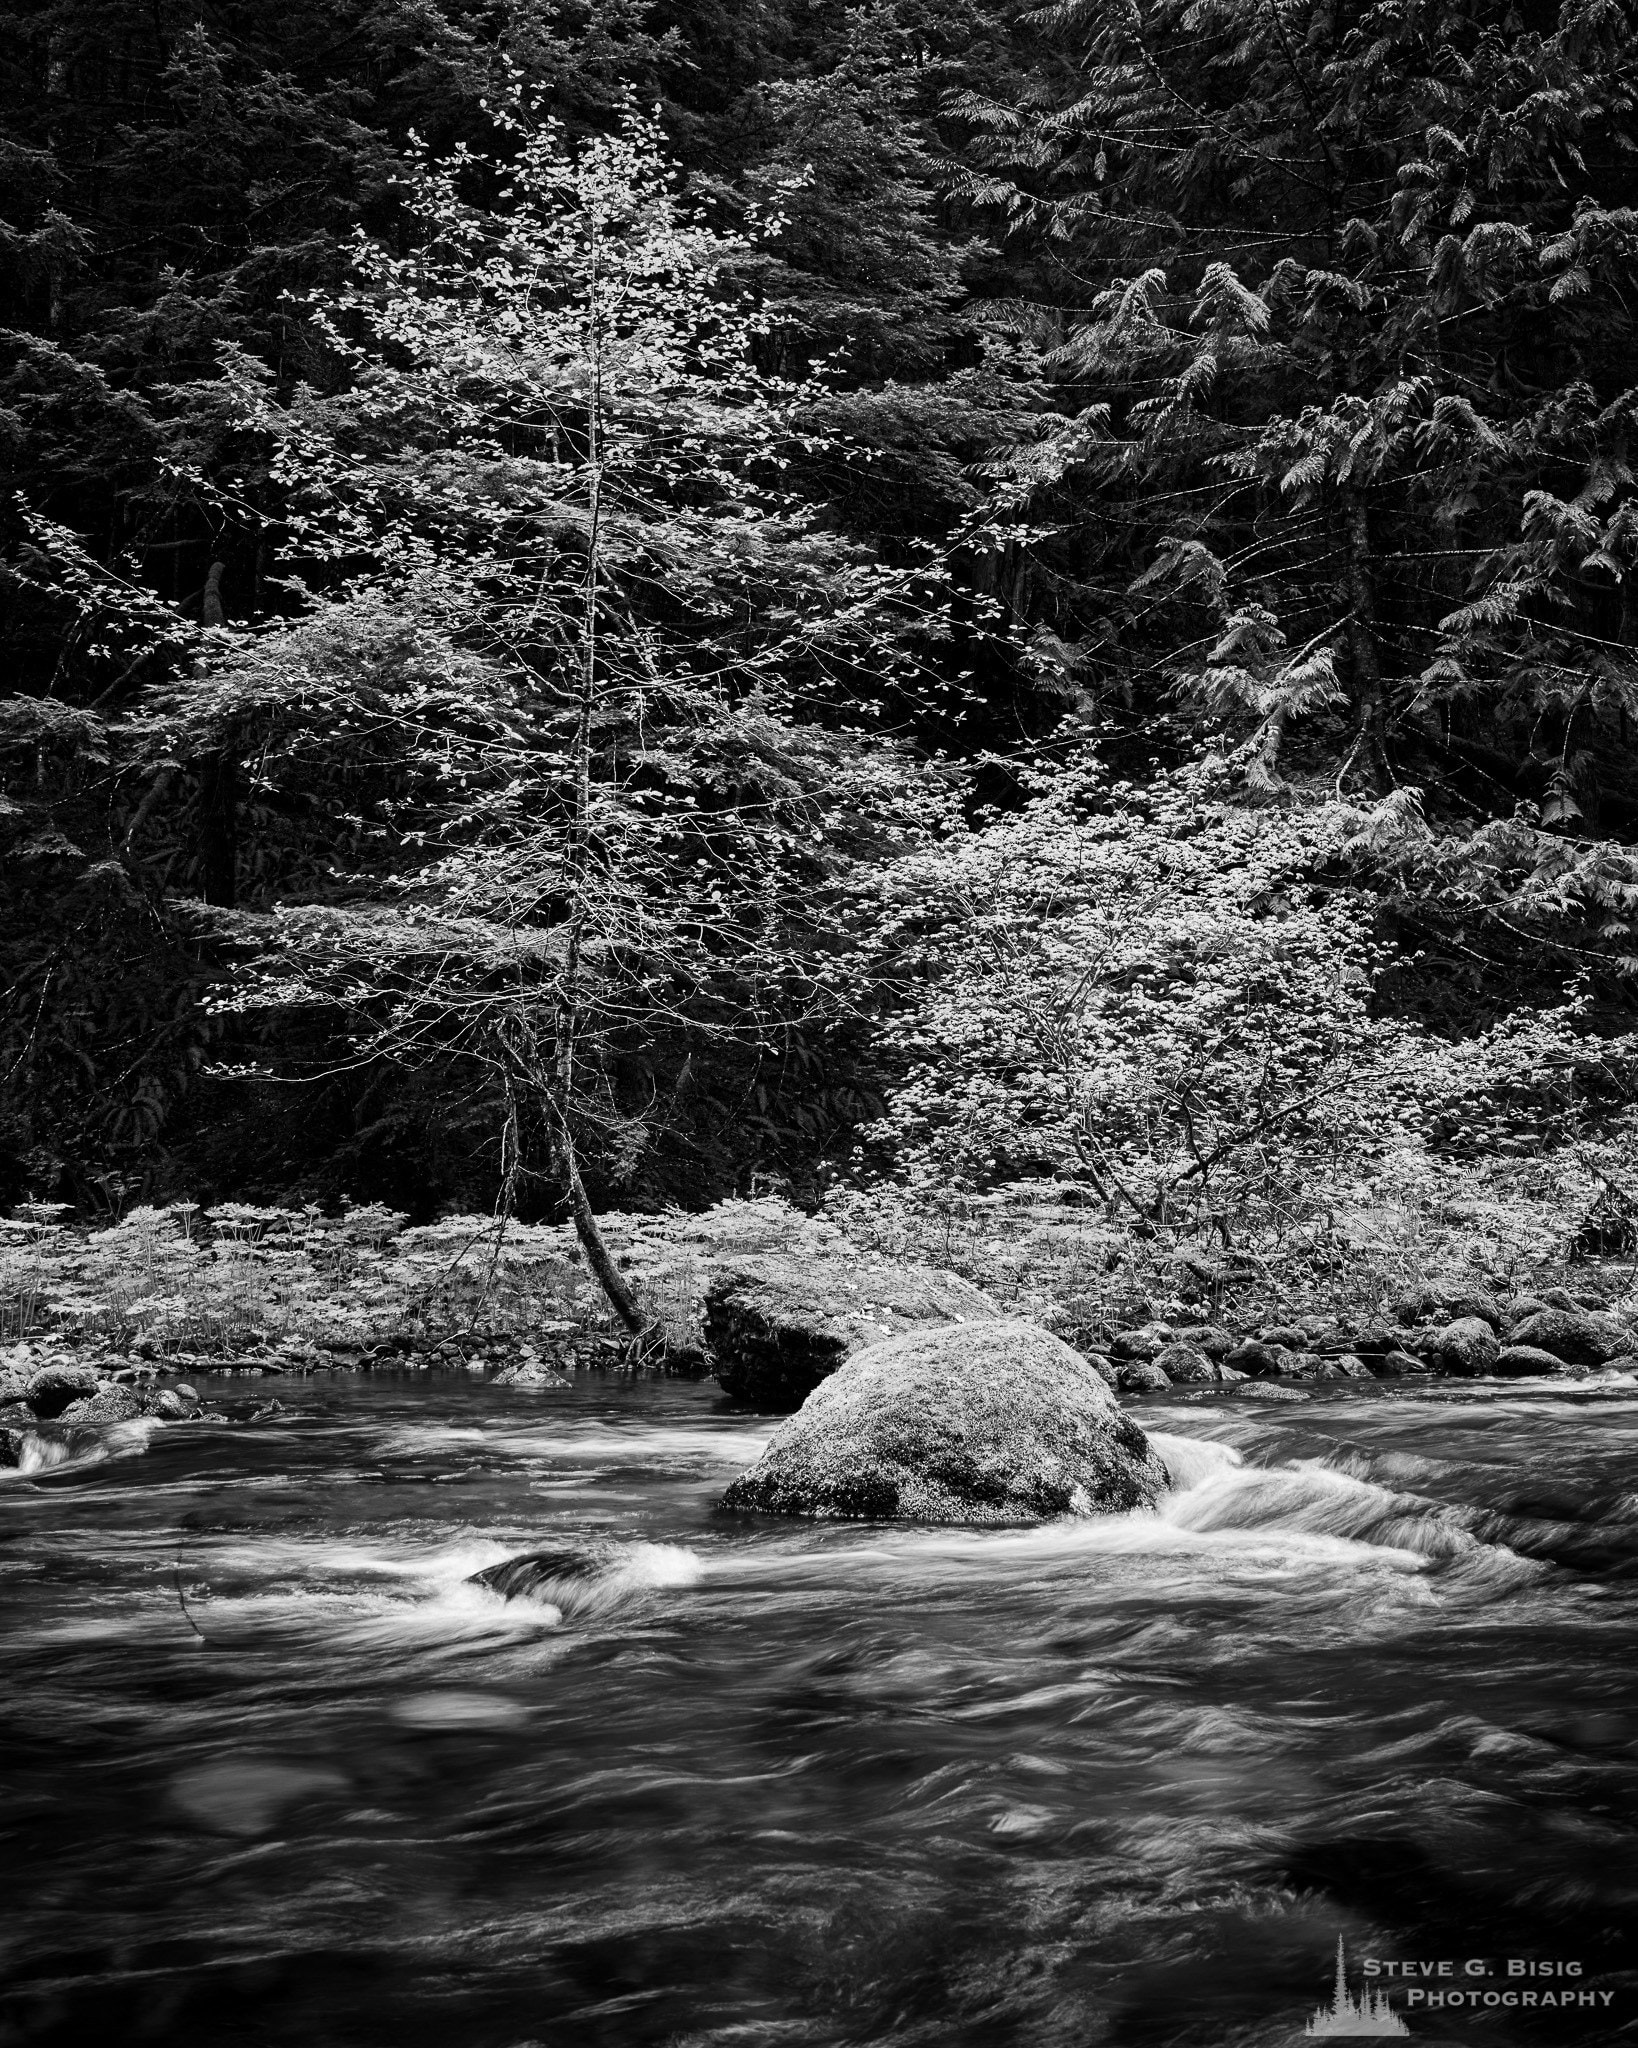 A black and white landscape photograph of the forest along the banks of Skate Creek in the Gifford Pinchot National Forest, Washington.